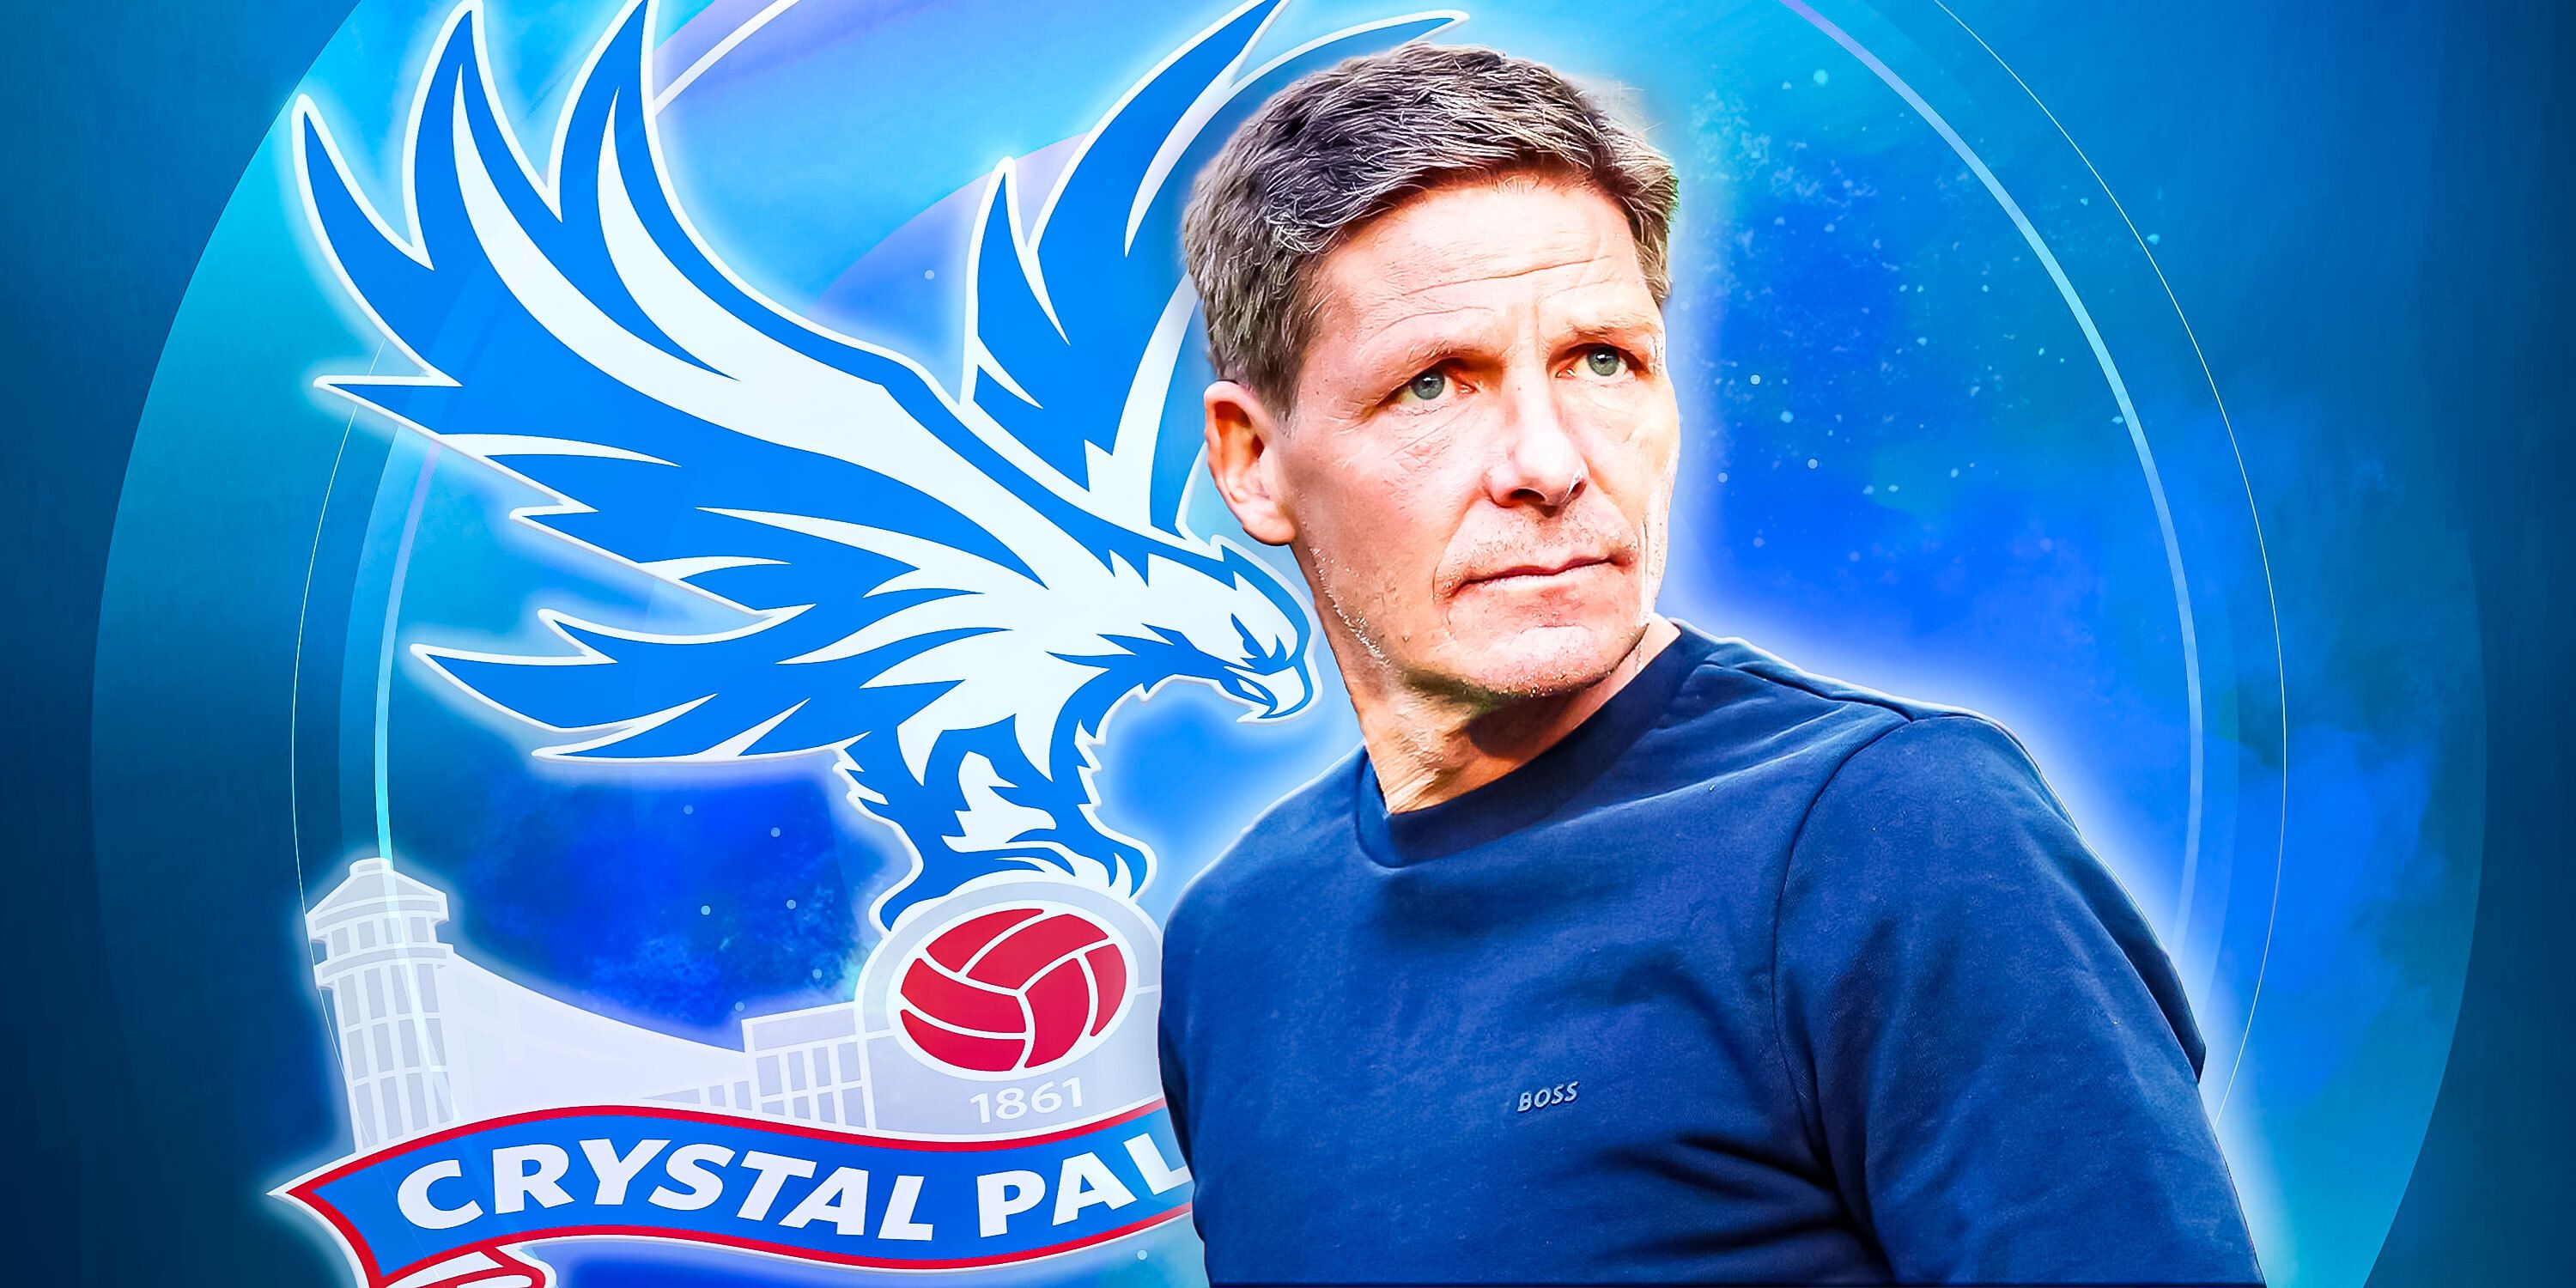 Who is Crystal Palace manager Oliver Glasner